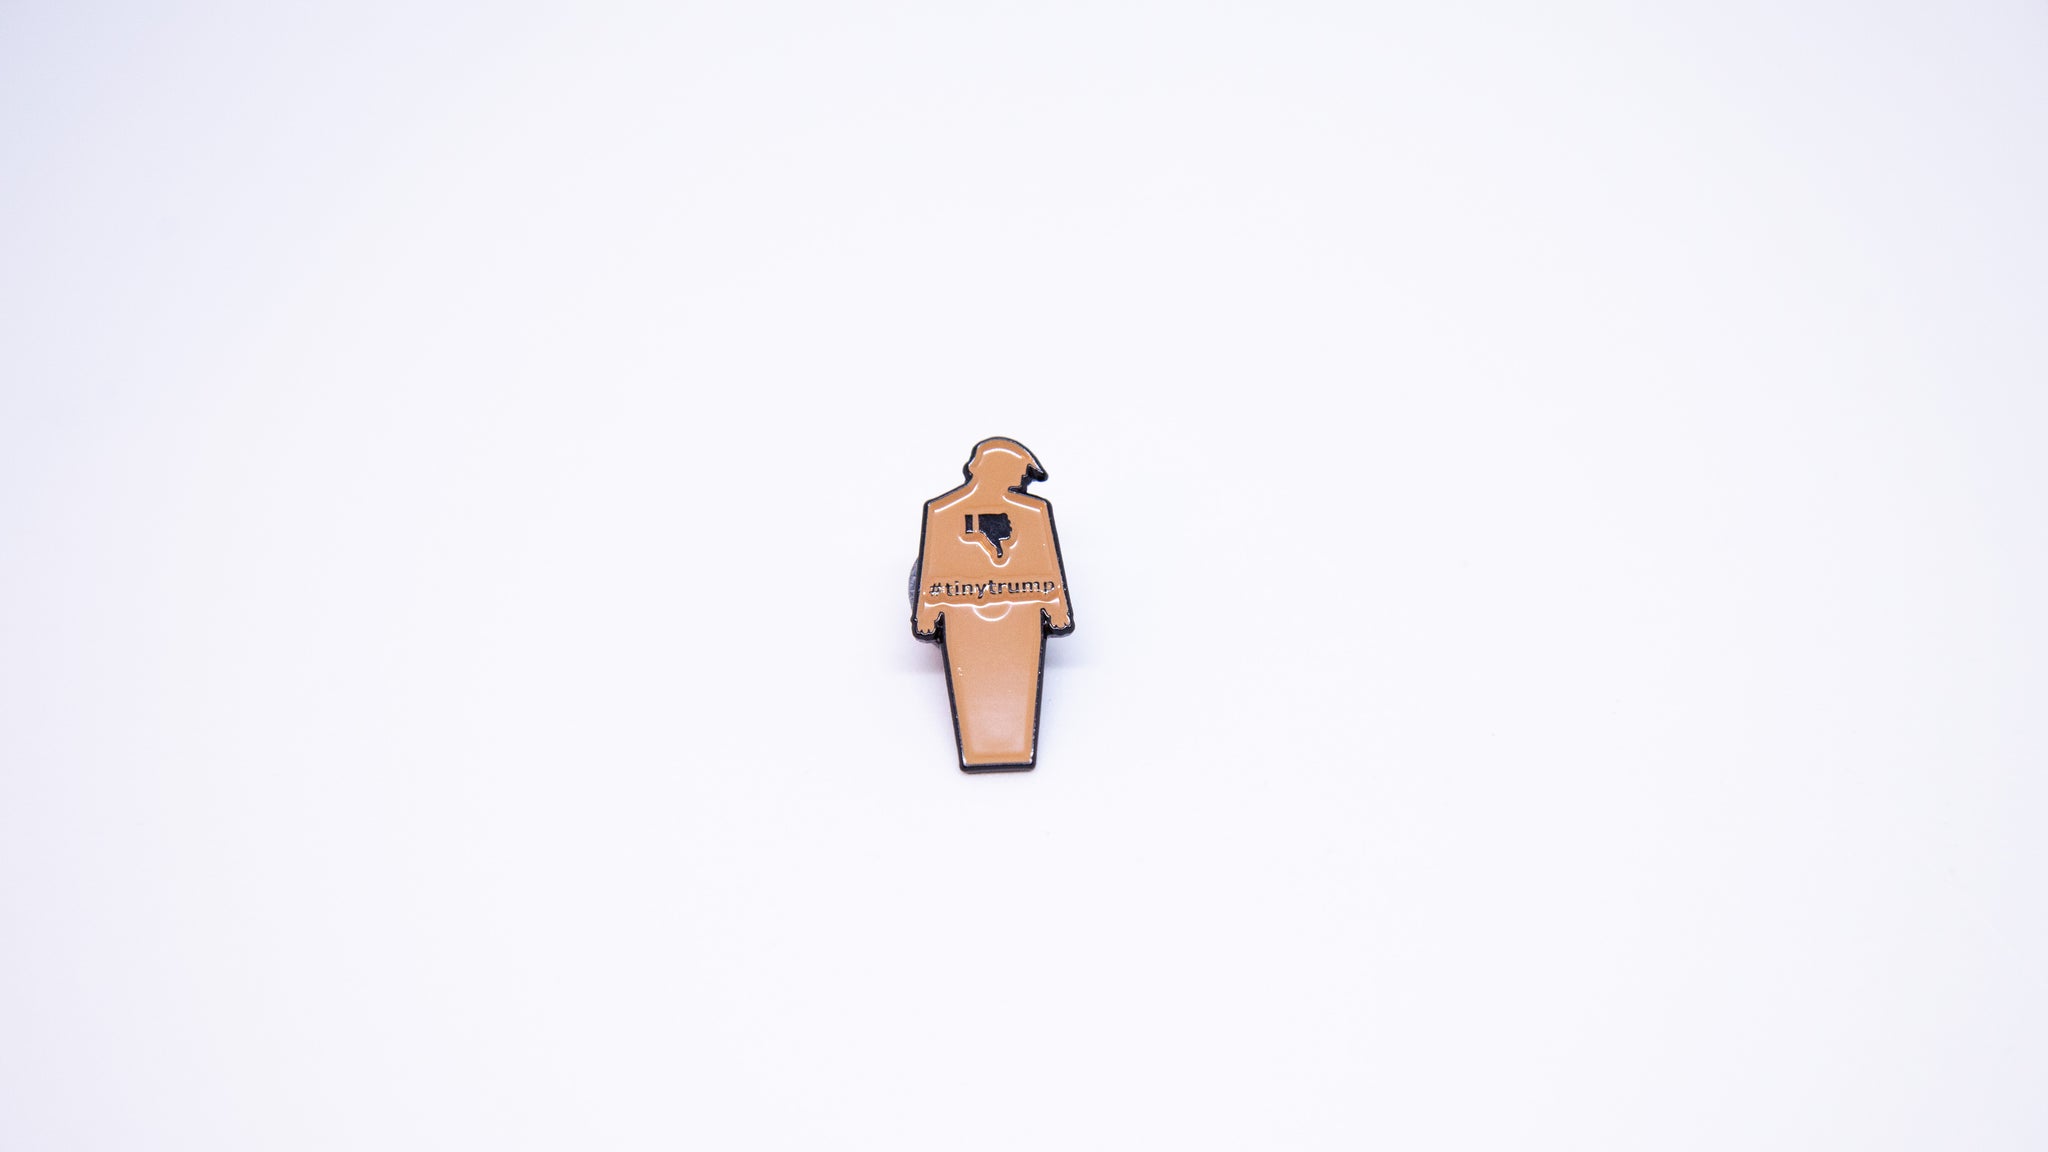 Close up shot of a 1.5" tiny trump enamel pin shown with a thumbs down sign